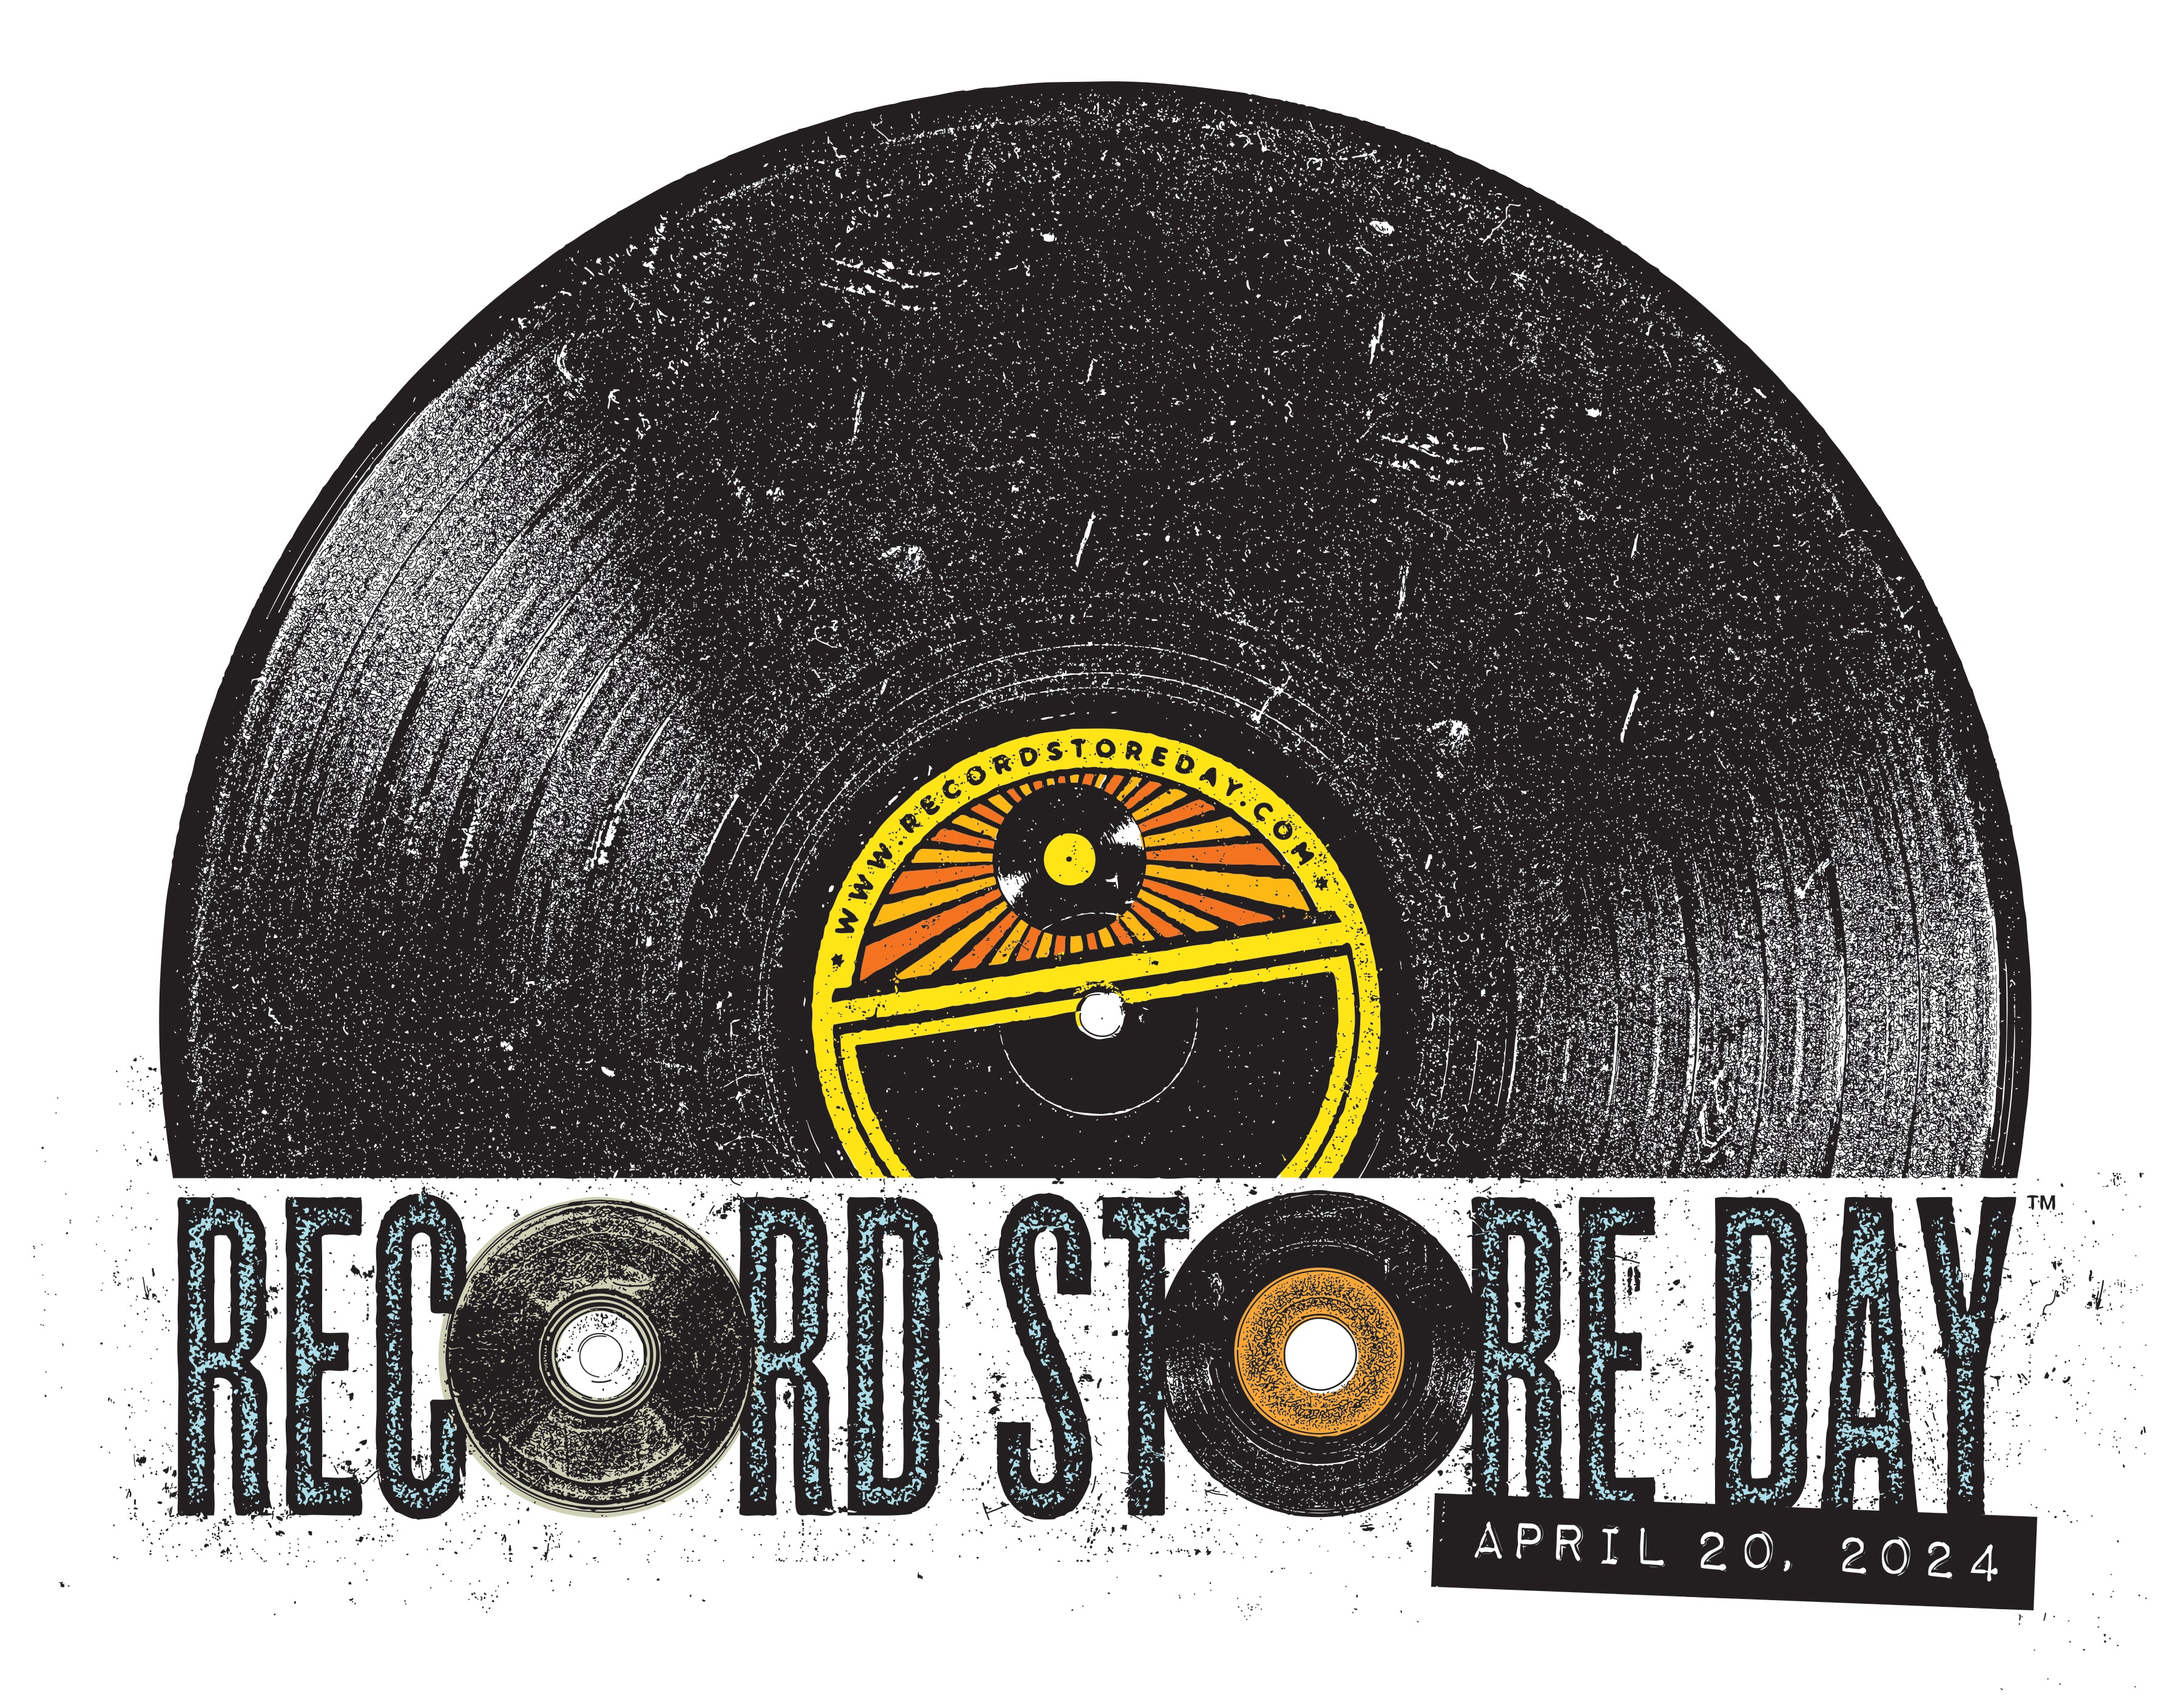 https://www.lovevinylrecords.com/pages/record-store-day-04-19-2024-information-pre-orders